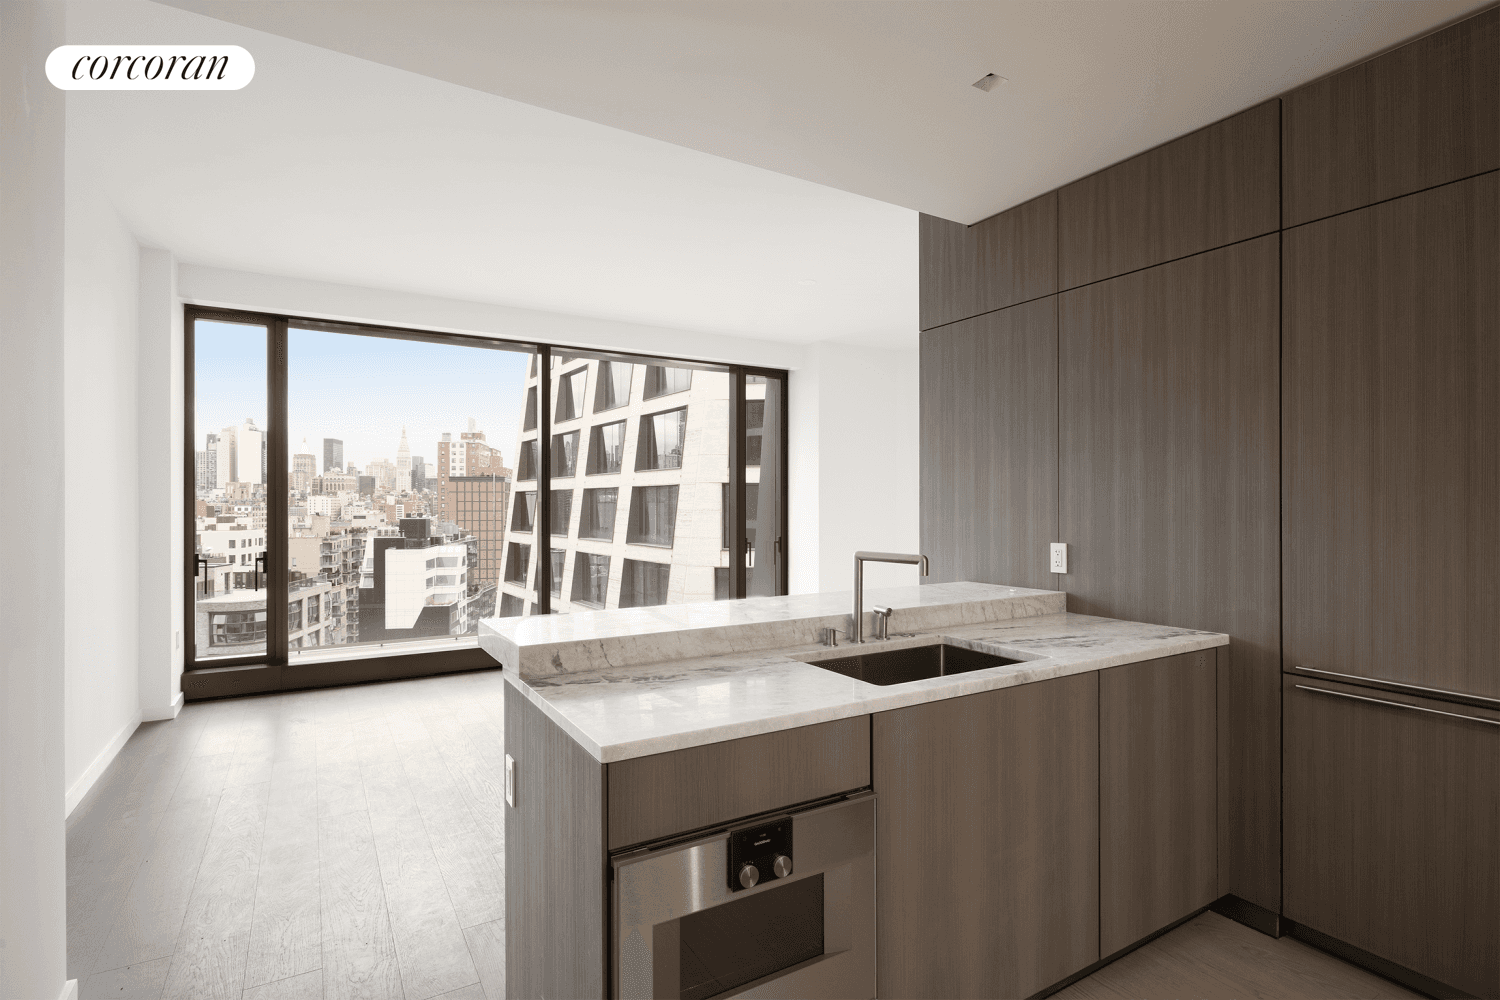 Welcome to Residence 15E in the west tower of the brand new, luxury development, One High Line.